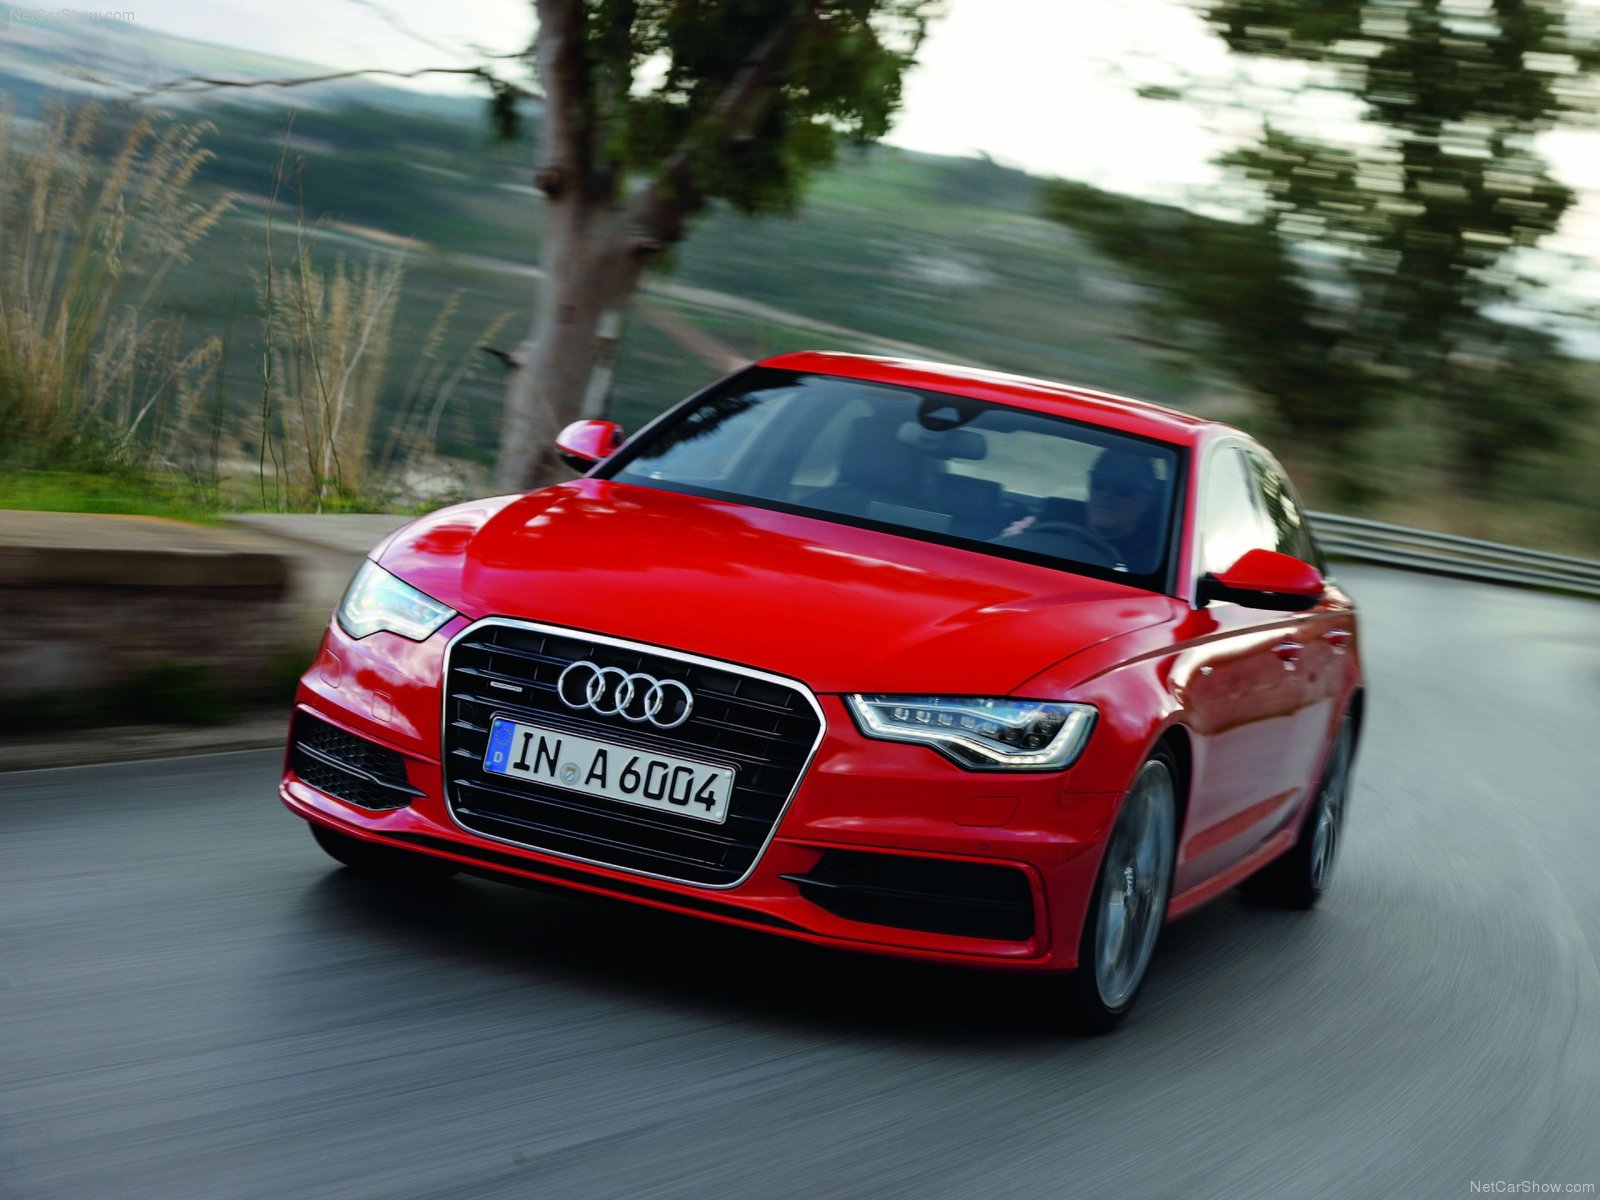 AUTOZONE: New Audi A6 (2012) Stills and Wallpapers.... Cooool!!!!